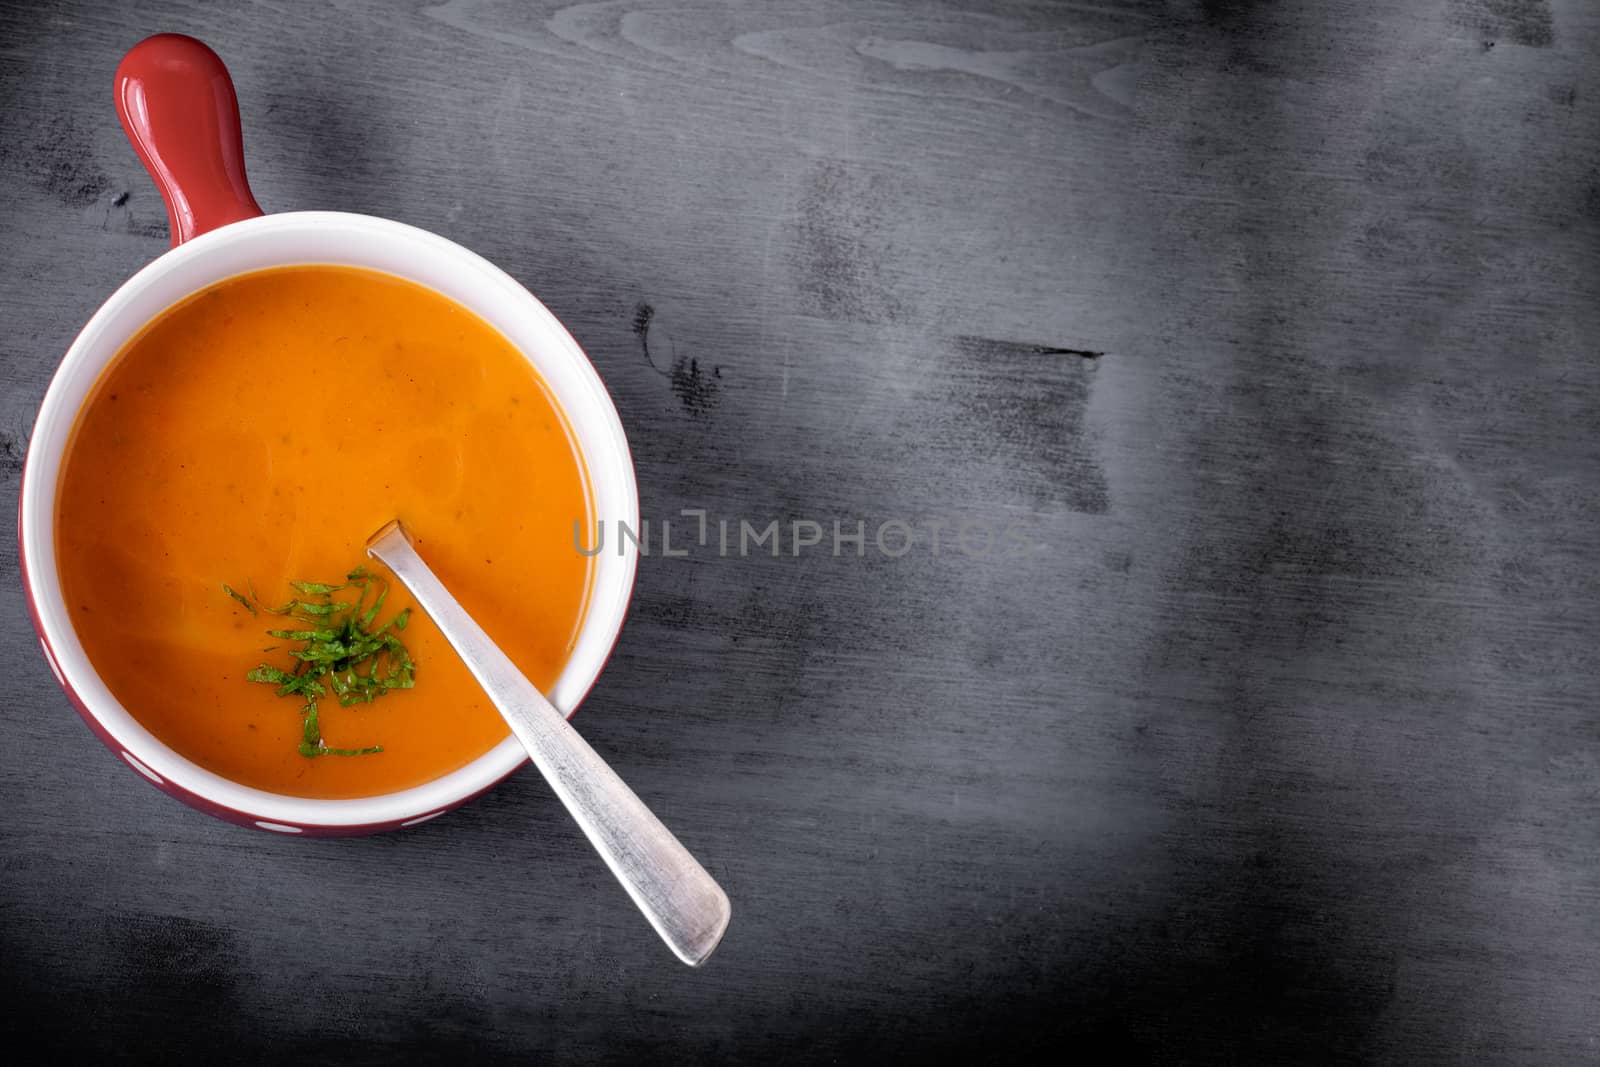 Pumpkin creme soup with a spoon served on a table. by supercat67